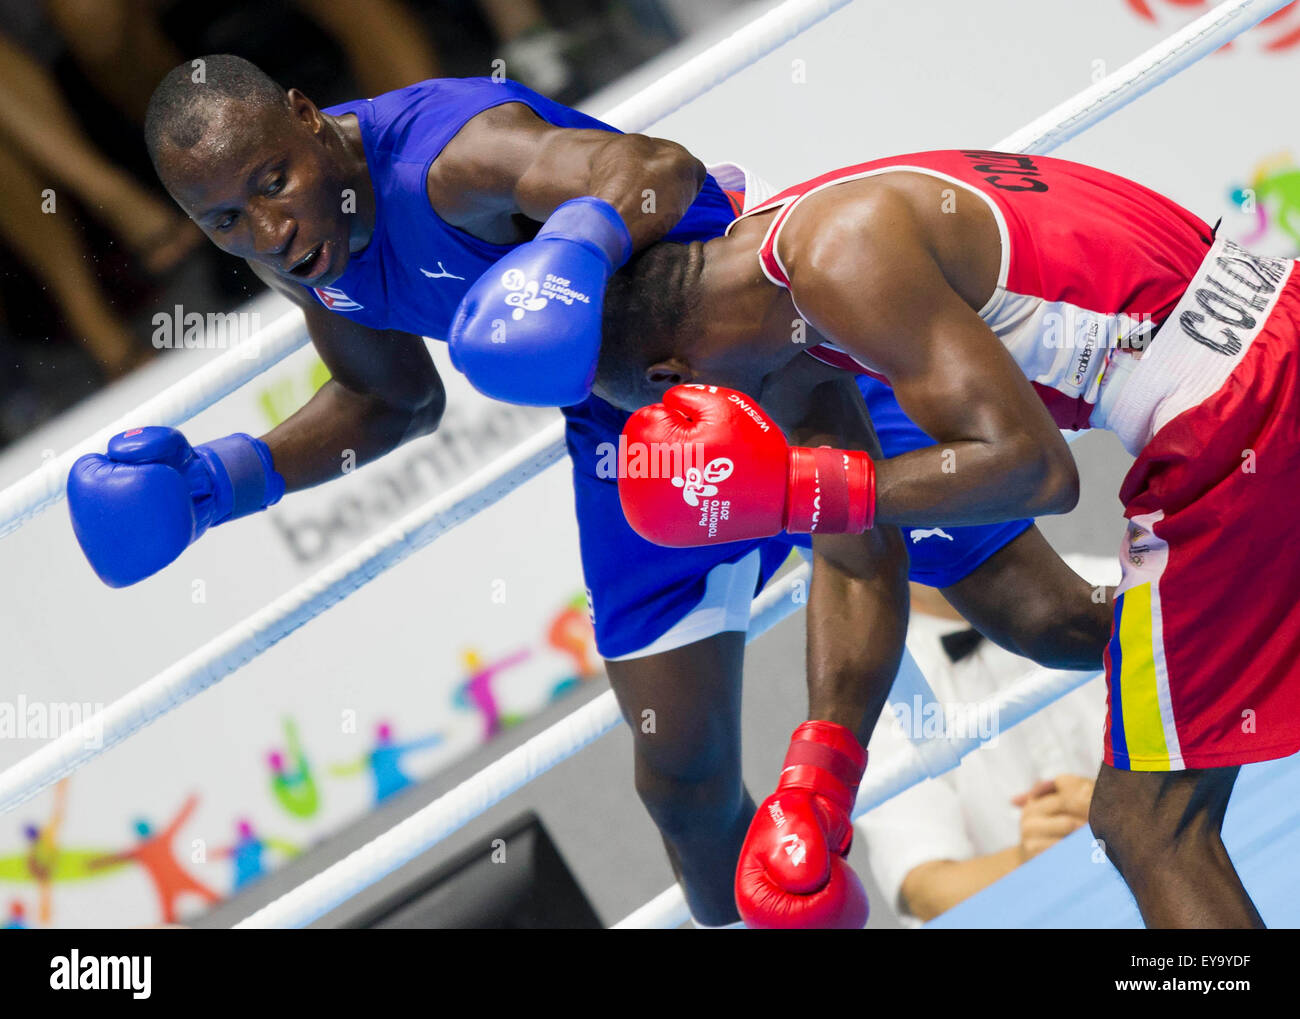 Toronto, Canada. 24th July, 2015. Erislandy Savon (L) of Cuba fights against Deivis Julio Blanco of Colombia during the men's 91kg final match of the boxing event at the 17th Pan American Games in Toronto, Canada, July 24, 2015. Erislandy Savon won 2-1 and claimed the title. © Zou Zheng/Xinhua/Alamy Live News Stock Photo